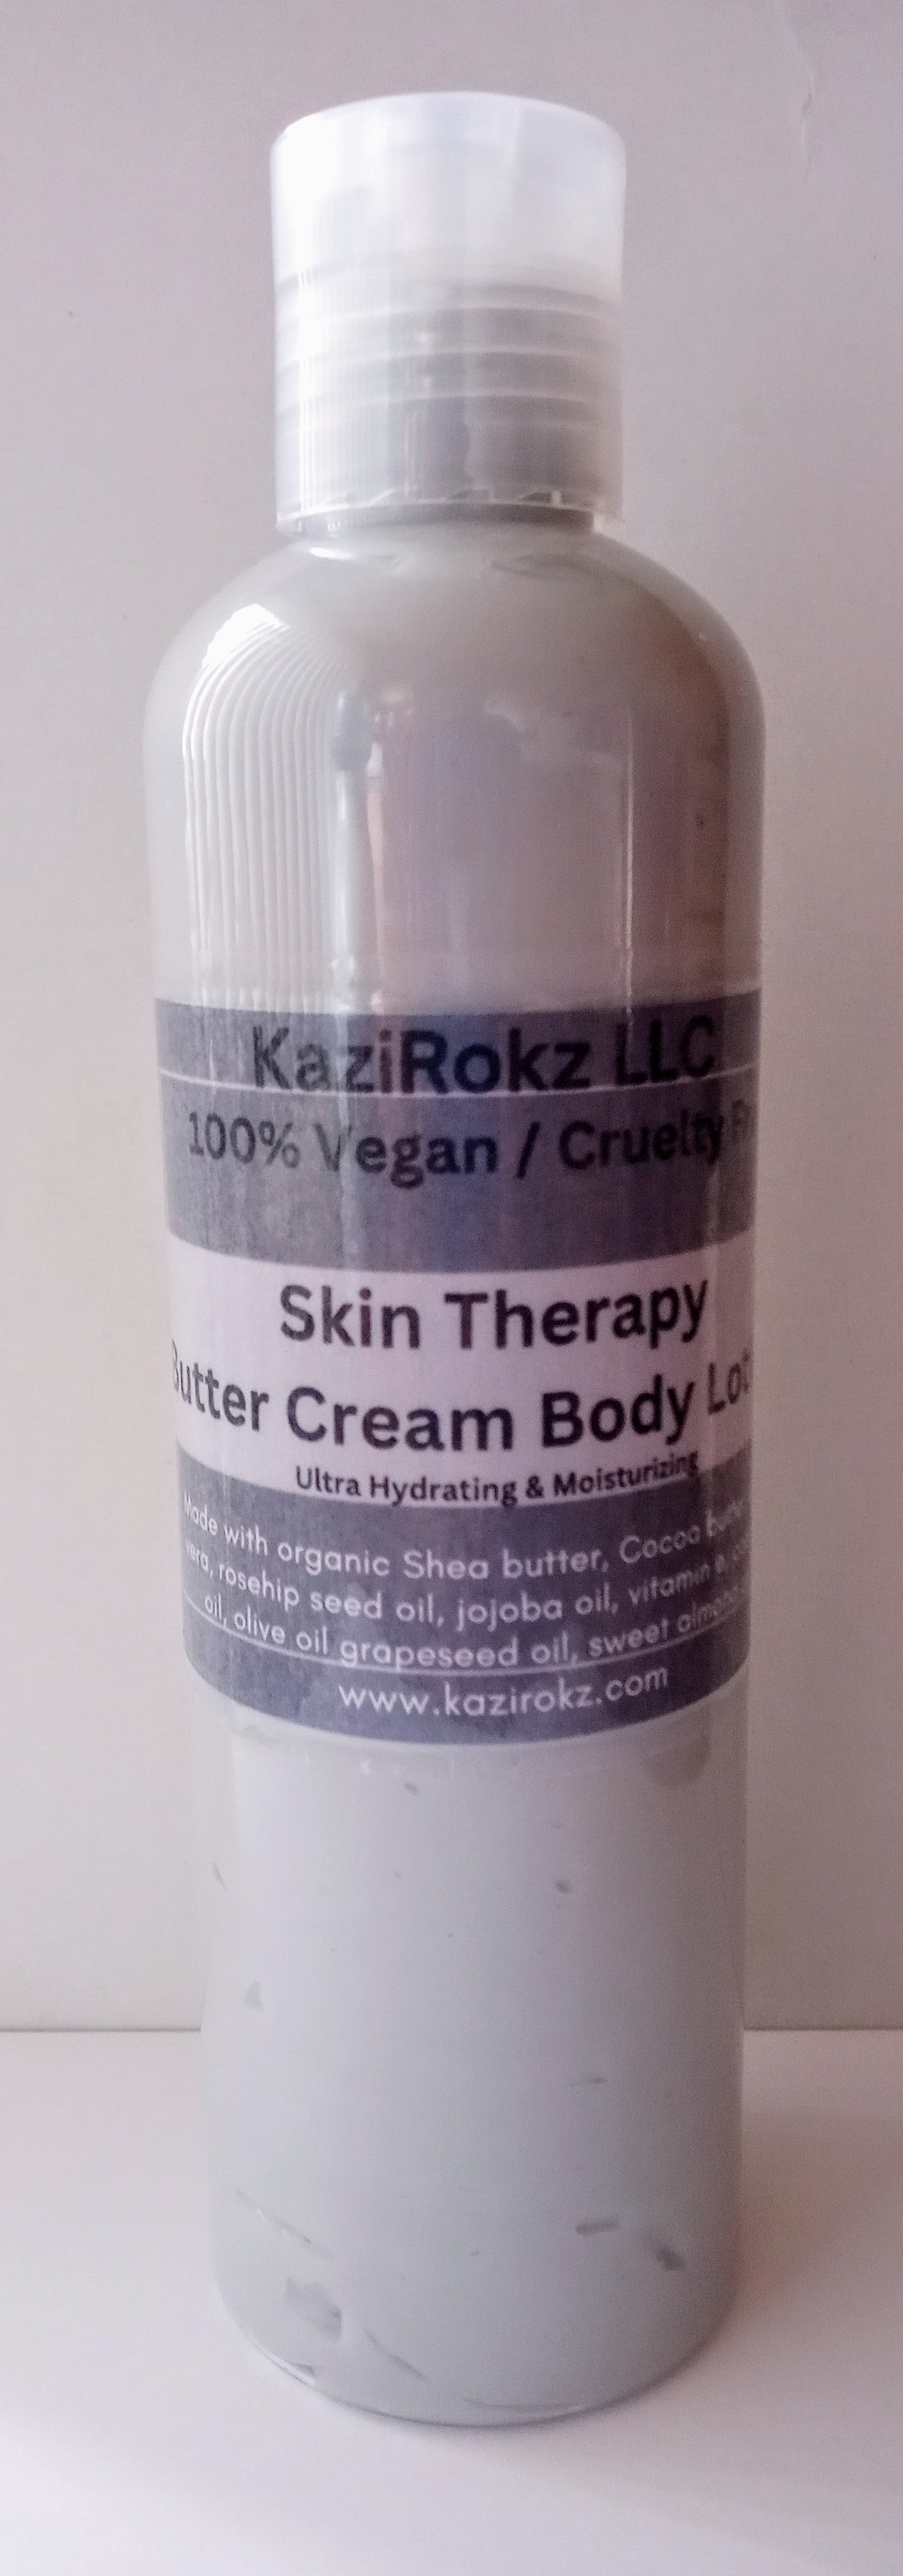 Skin Therapy Butter Cream Body Lotion (100% Vegan / Cruelty Free) Skin Therapy/ Skin detoxifying Butter cream.